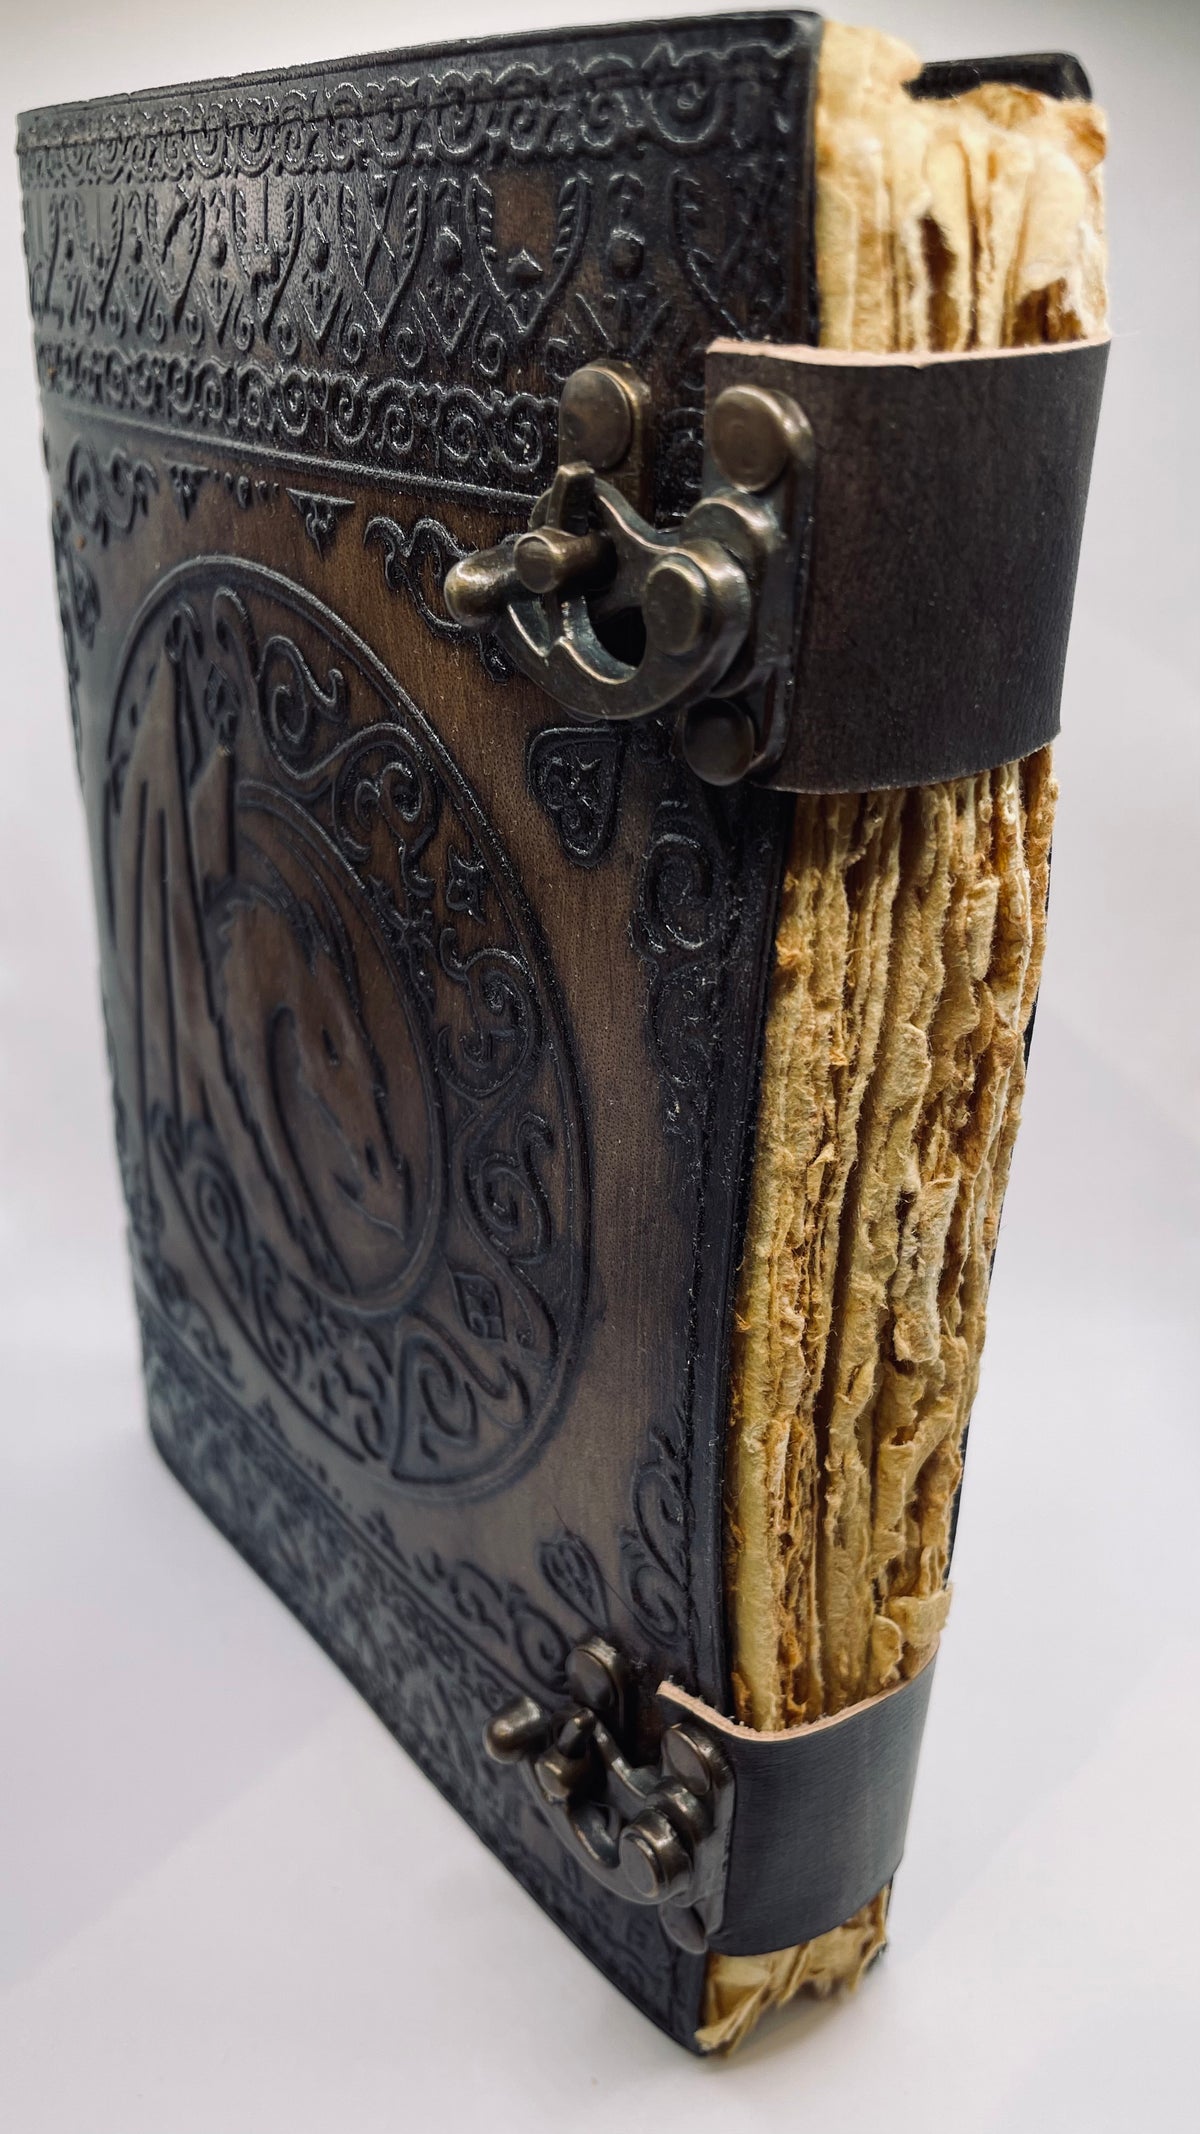 Dungeon Master Real Leather Notebook | Limited "Ancient Tome" Edition